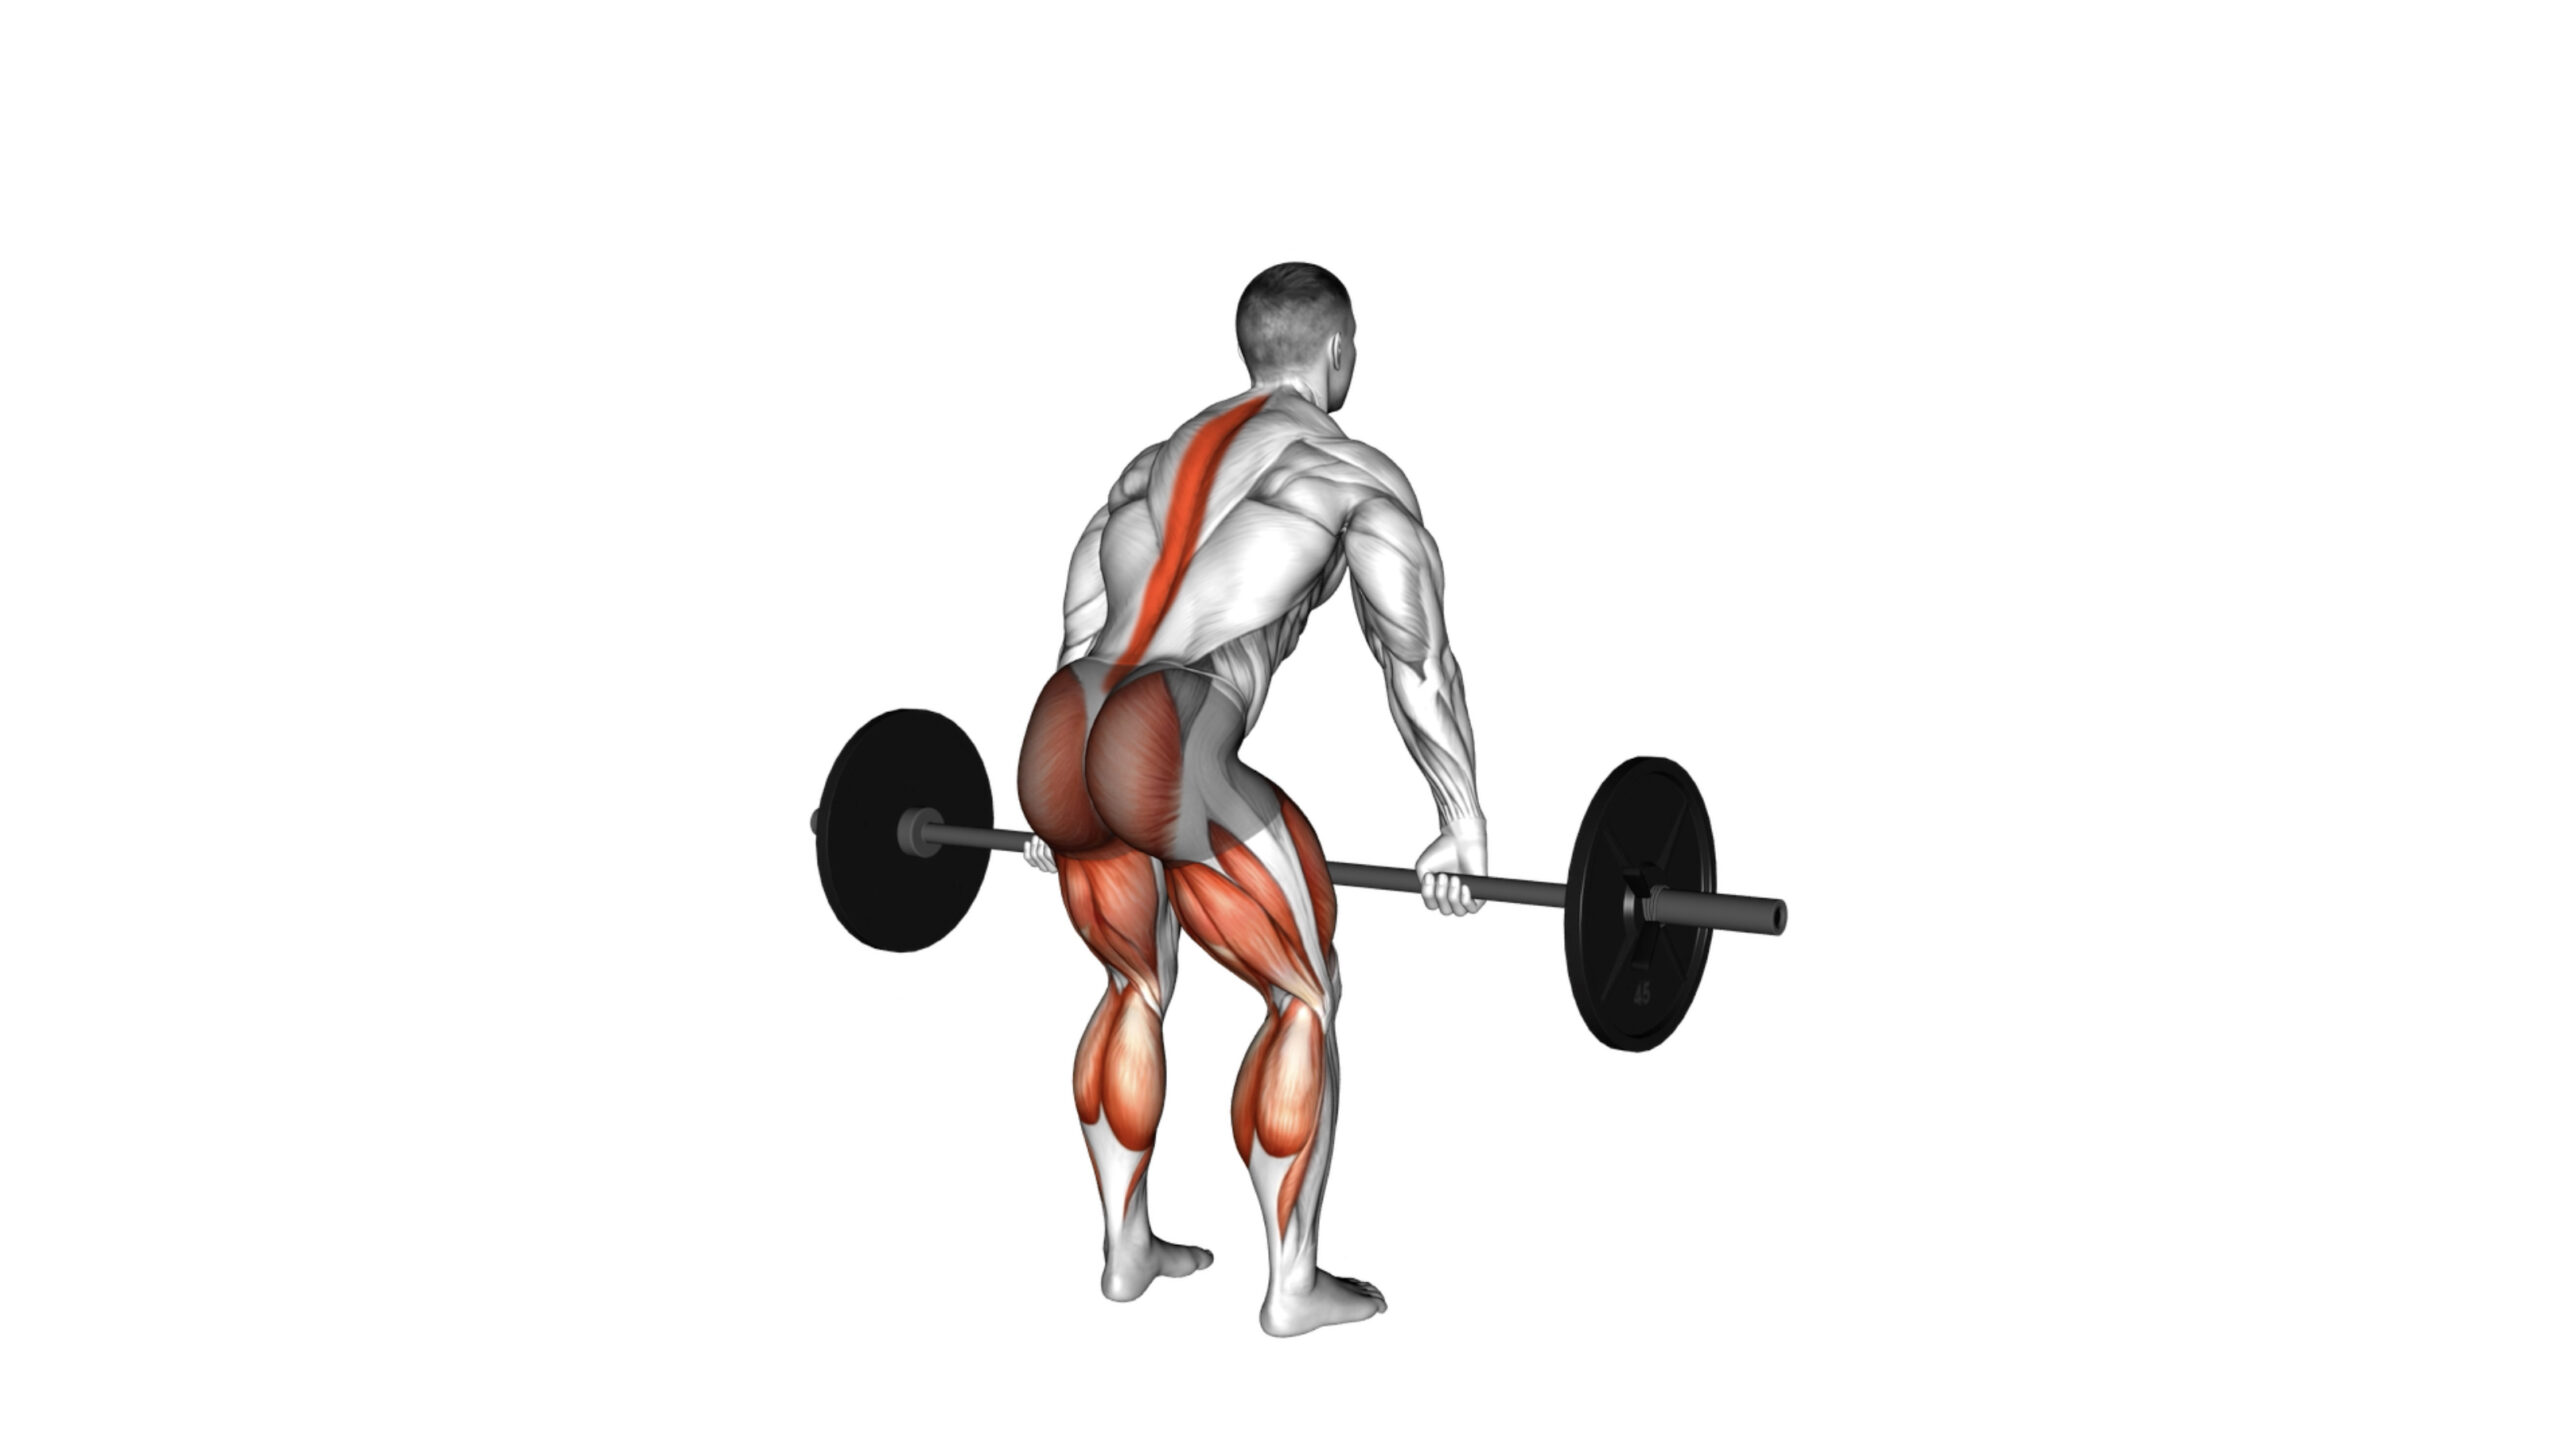 10 Barbell Exercises For Glutes - Strengthen And Sculpt Your Glute Muscles